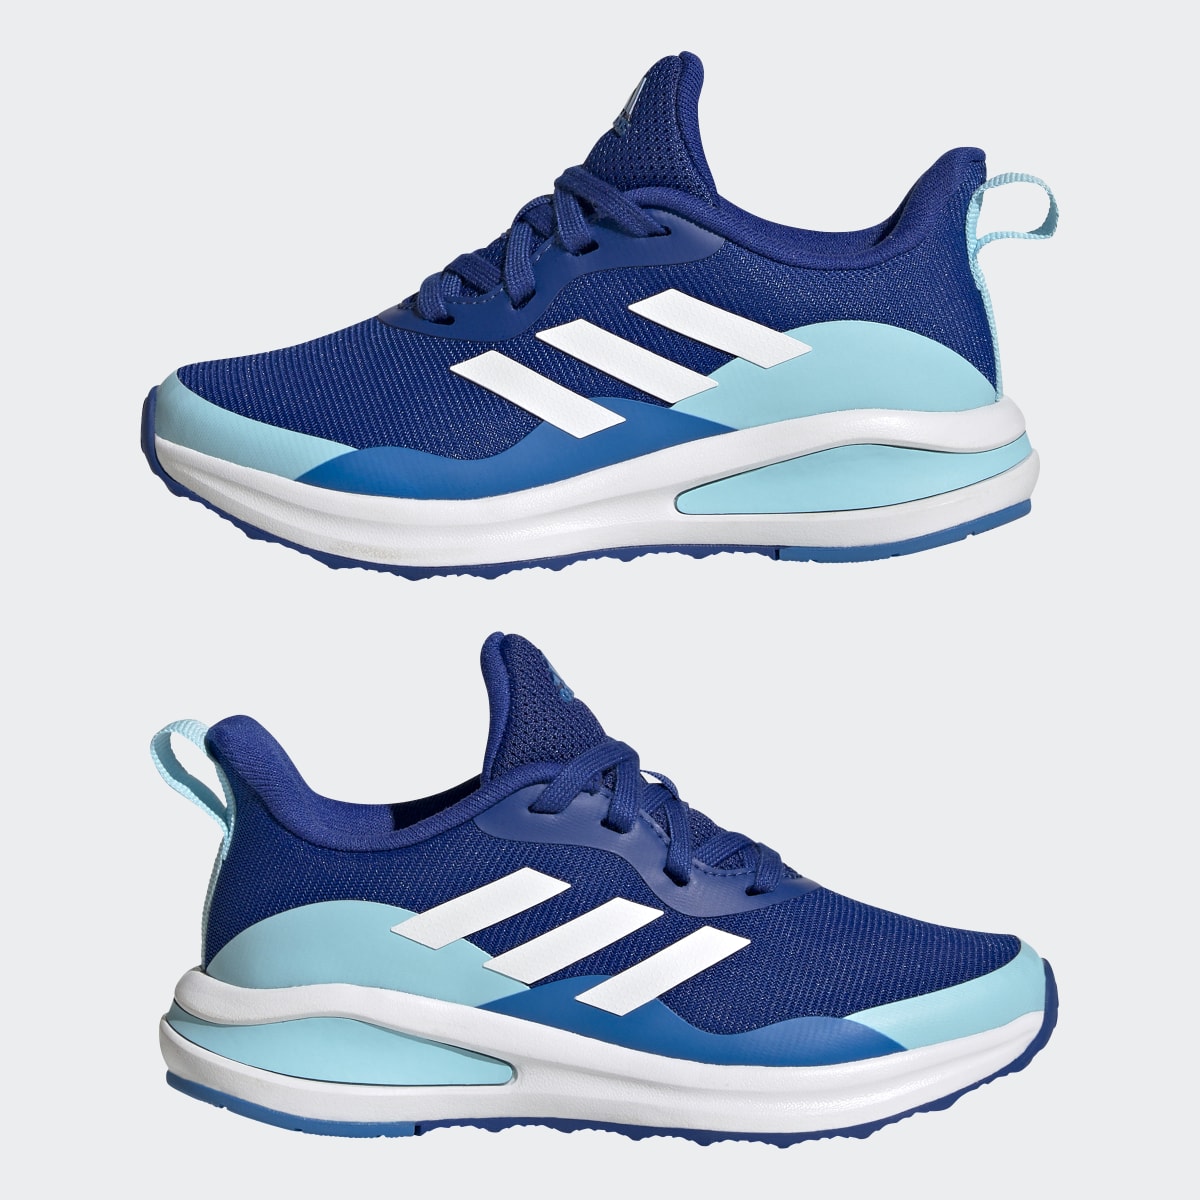 Adidas FortaRun Sport Running Lace Shoes. 8